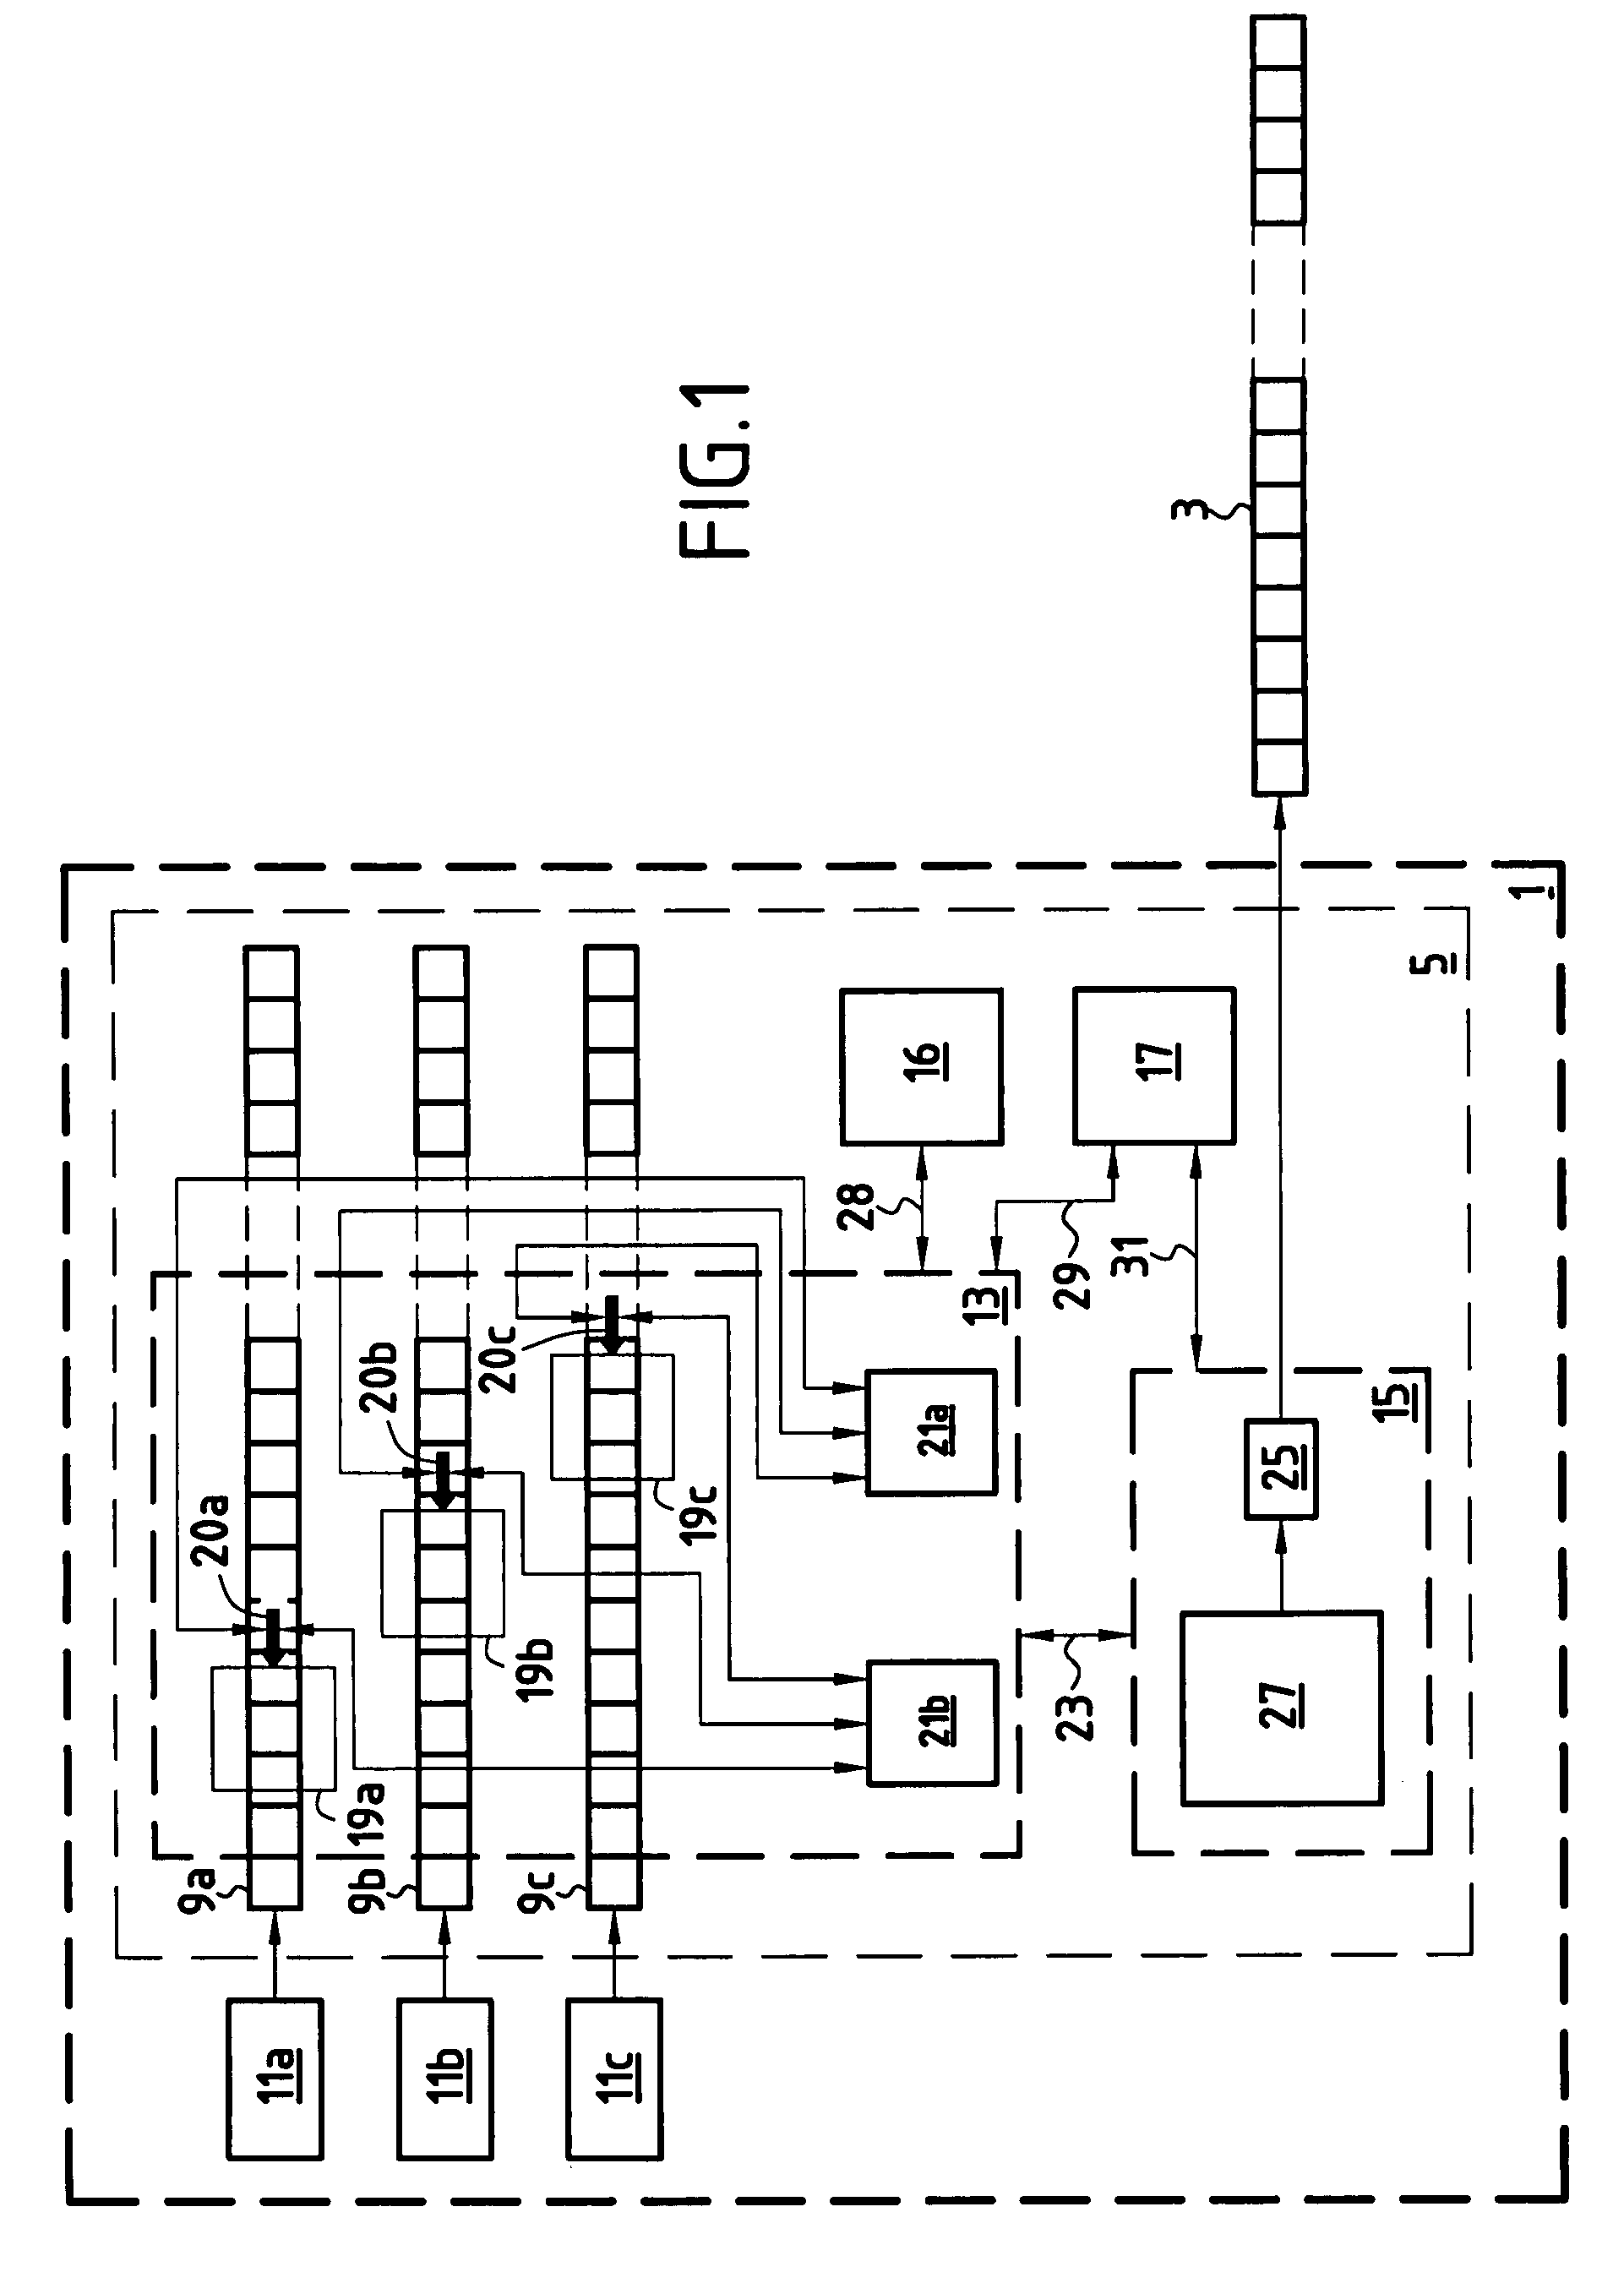 Method System and Device for Generation of a Pseudo-Random Data Sequence